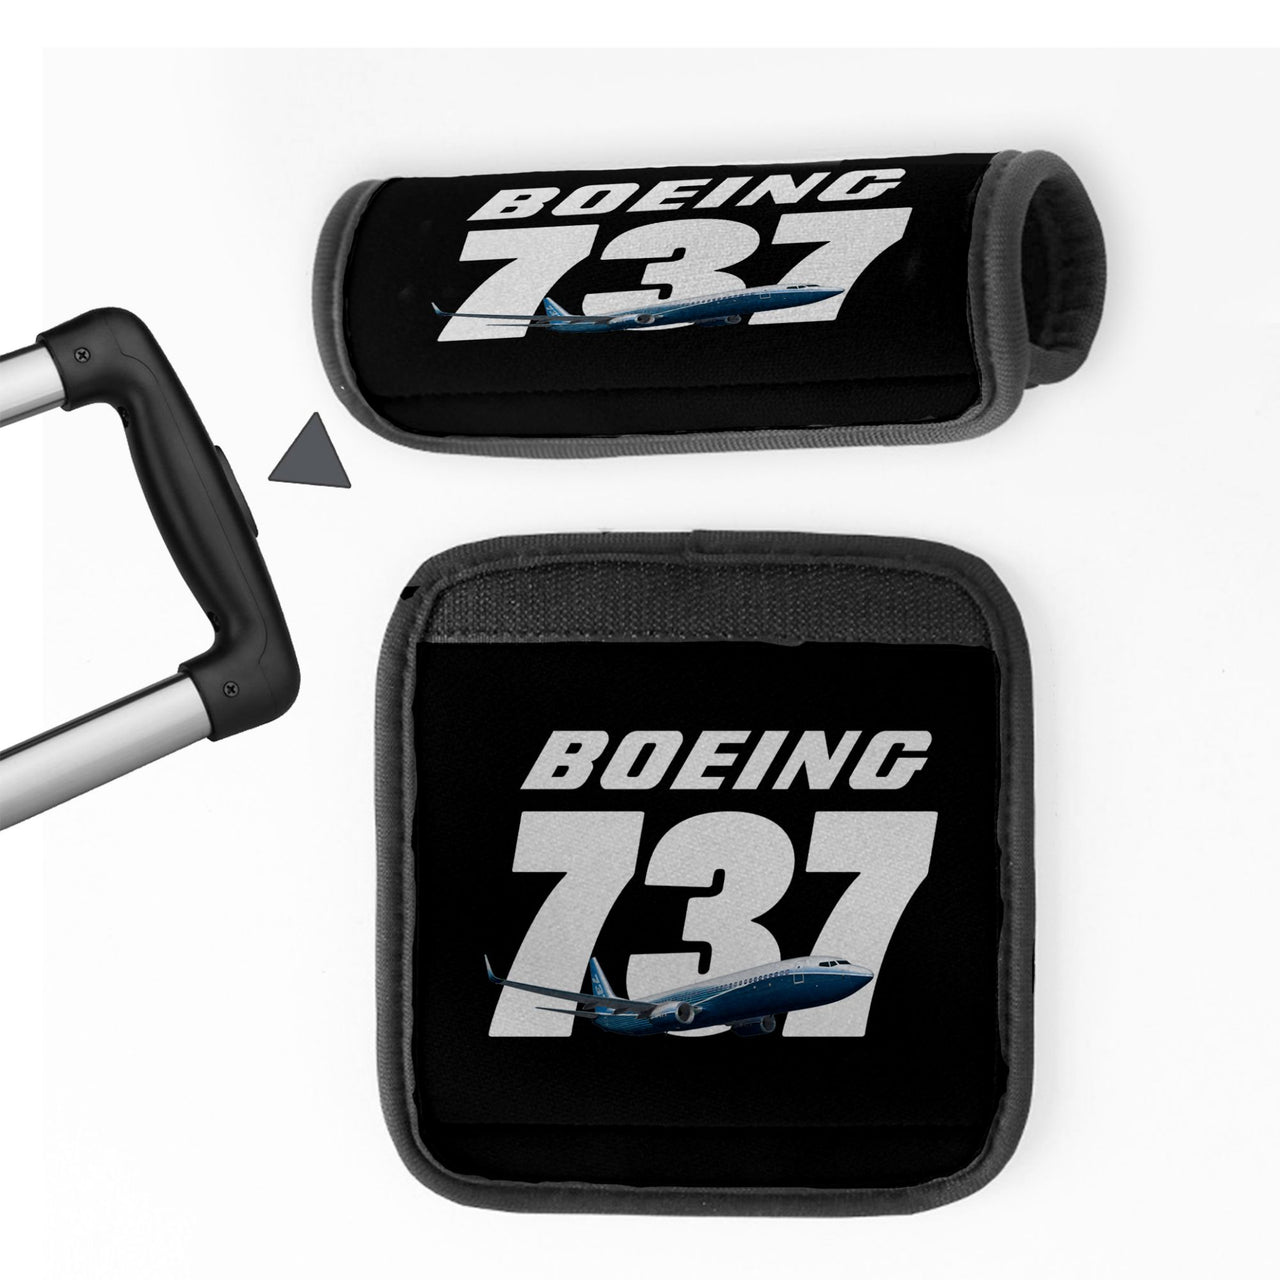 Super Boeing 737+Text Designed Neoprene Luggage Handle Covers